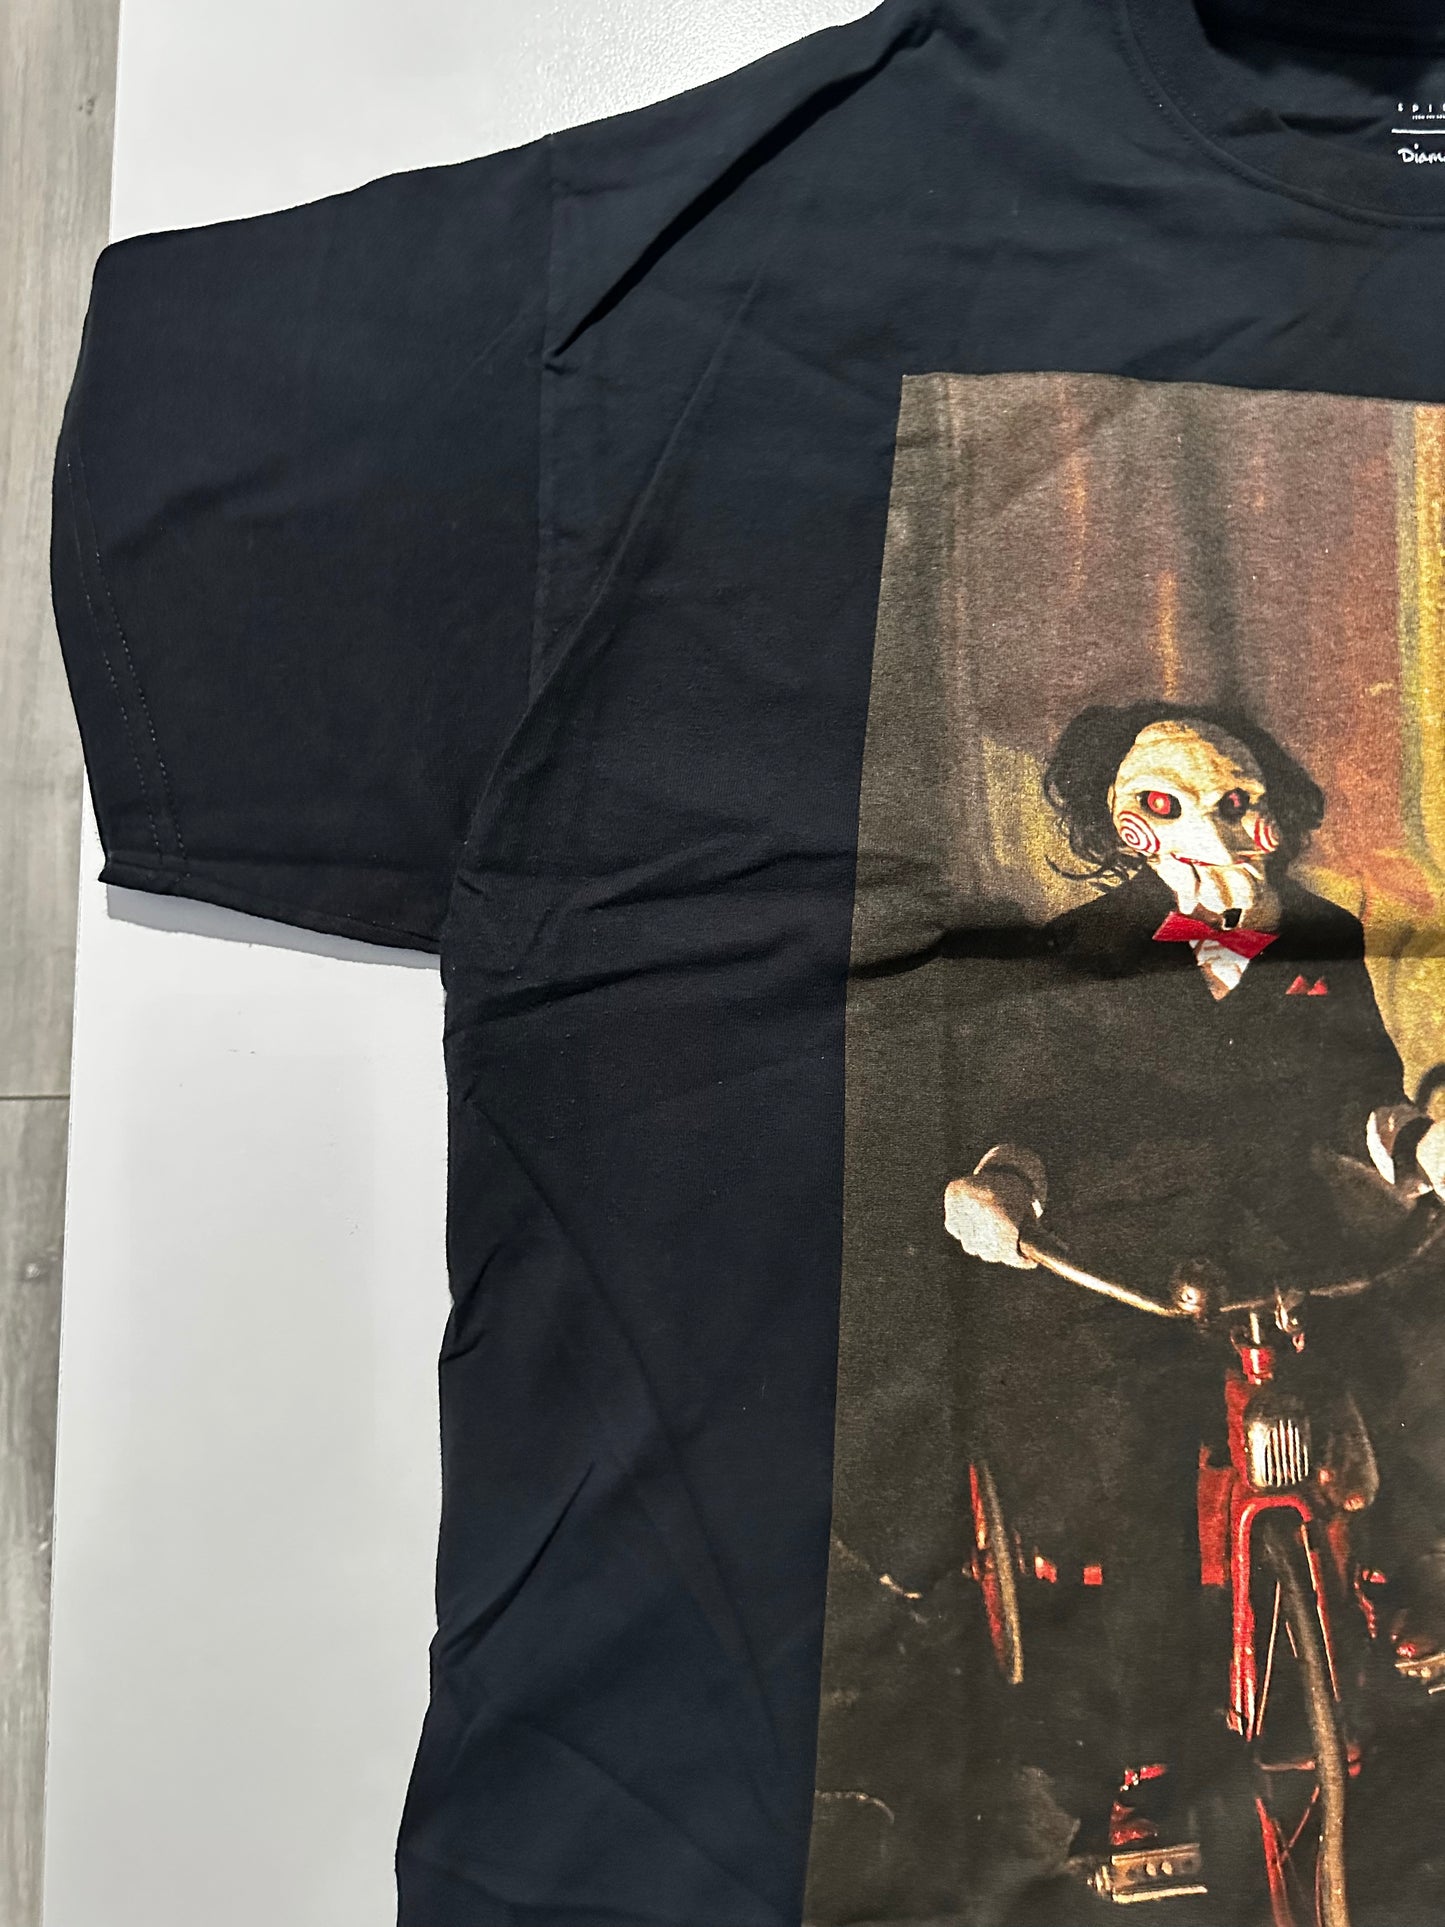 Diamond Supply x Saw:Spiral “Billy the puppet”